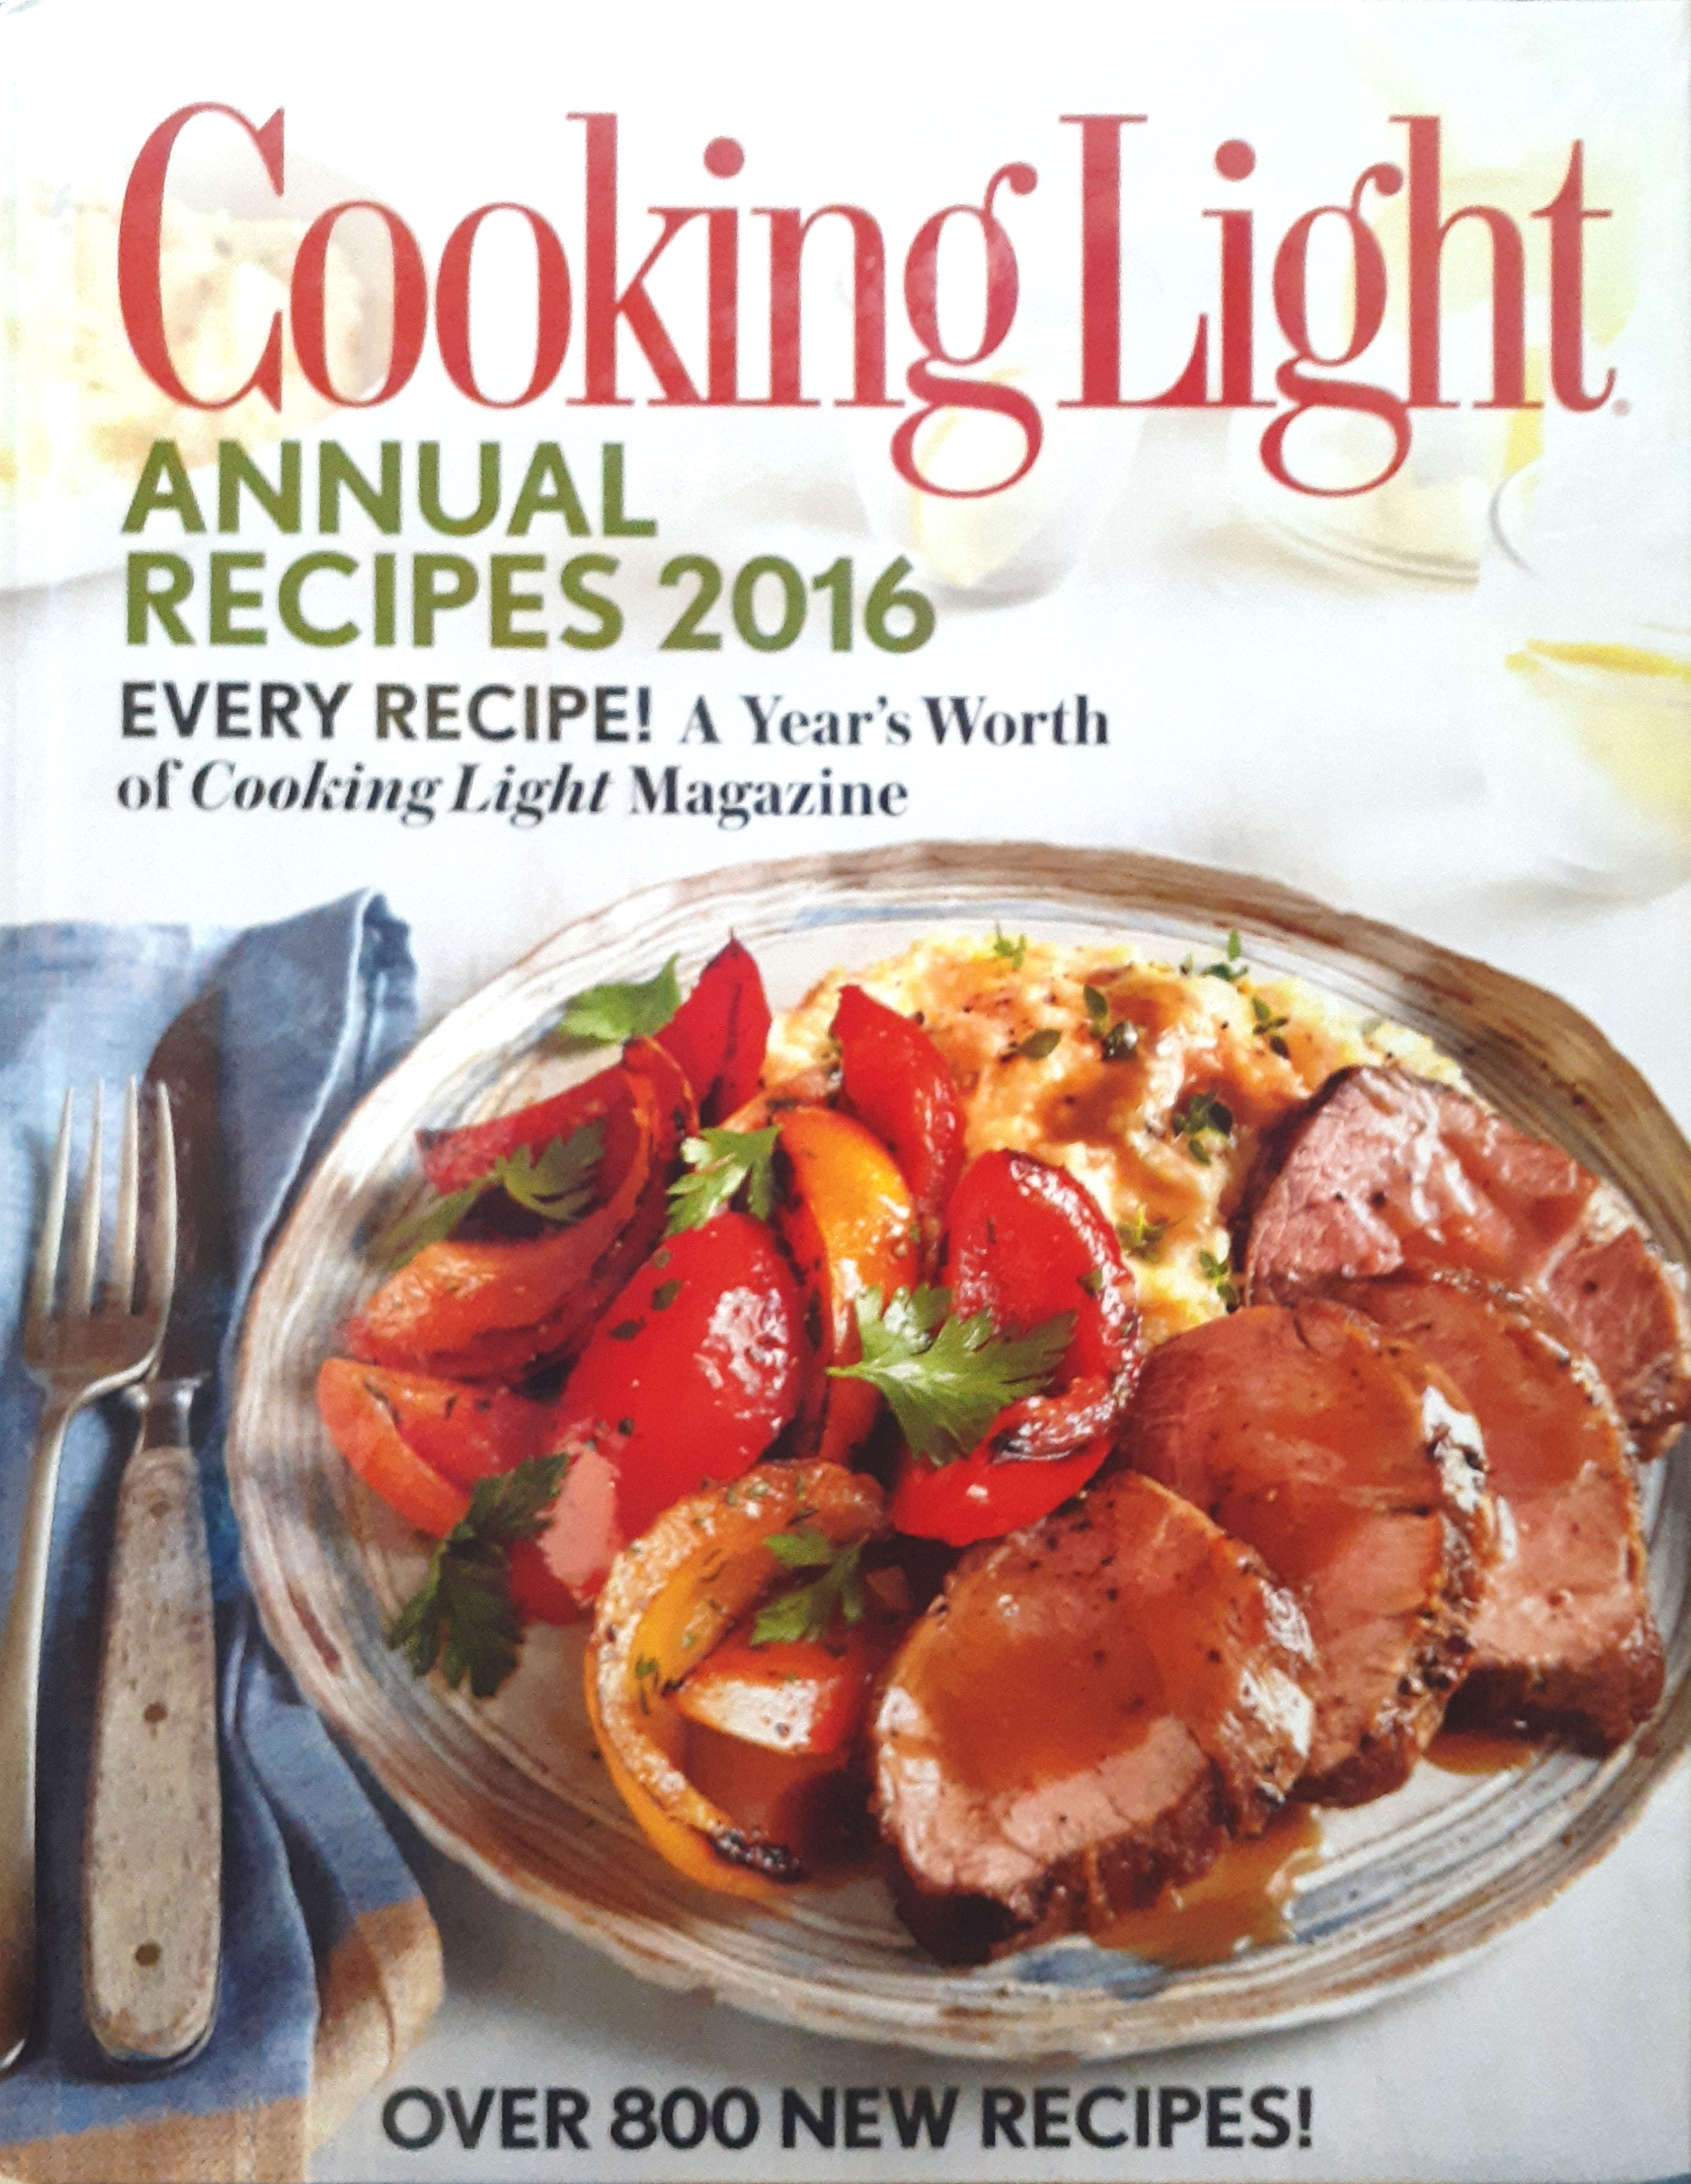 Cooking Light Annual Recipes Every Recipe! a Year's Worth of Cooking